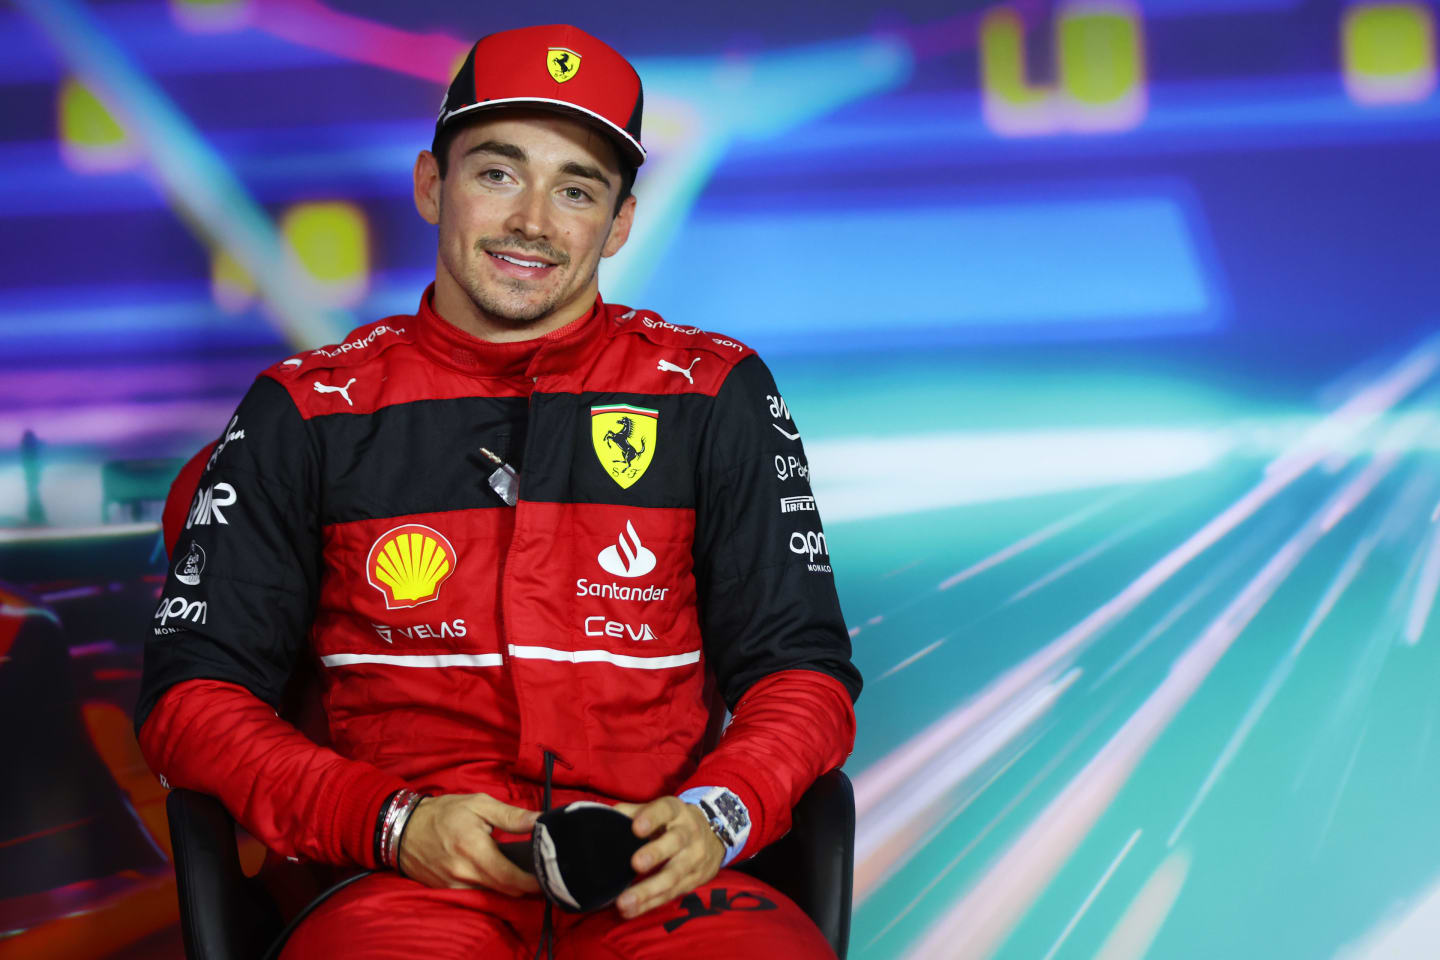 ABU DHABI, UNITED ARAB EMIRATES - NOVEMBER 19: Third placed qualifier Charles Leclerc of Monaco and Ferrari attends a drivers press conference following qualifying ahead of the F1 Grand Prix of Abu Dhabi at Yas Marina Circuit on November 19, 2022 in Abu Dhabi, United Arab Emirates. (Photo by Dan Istitene/Getty Images)